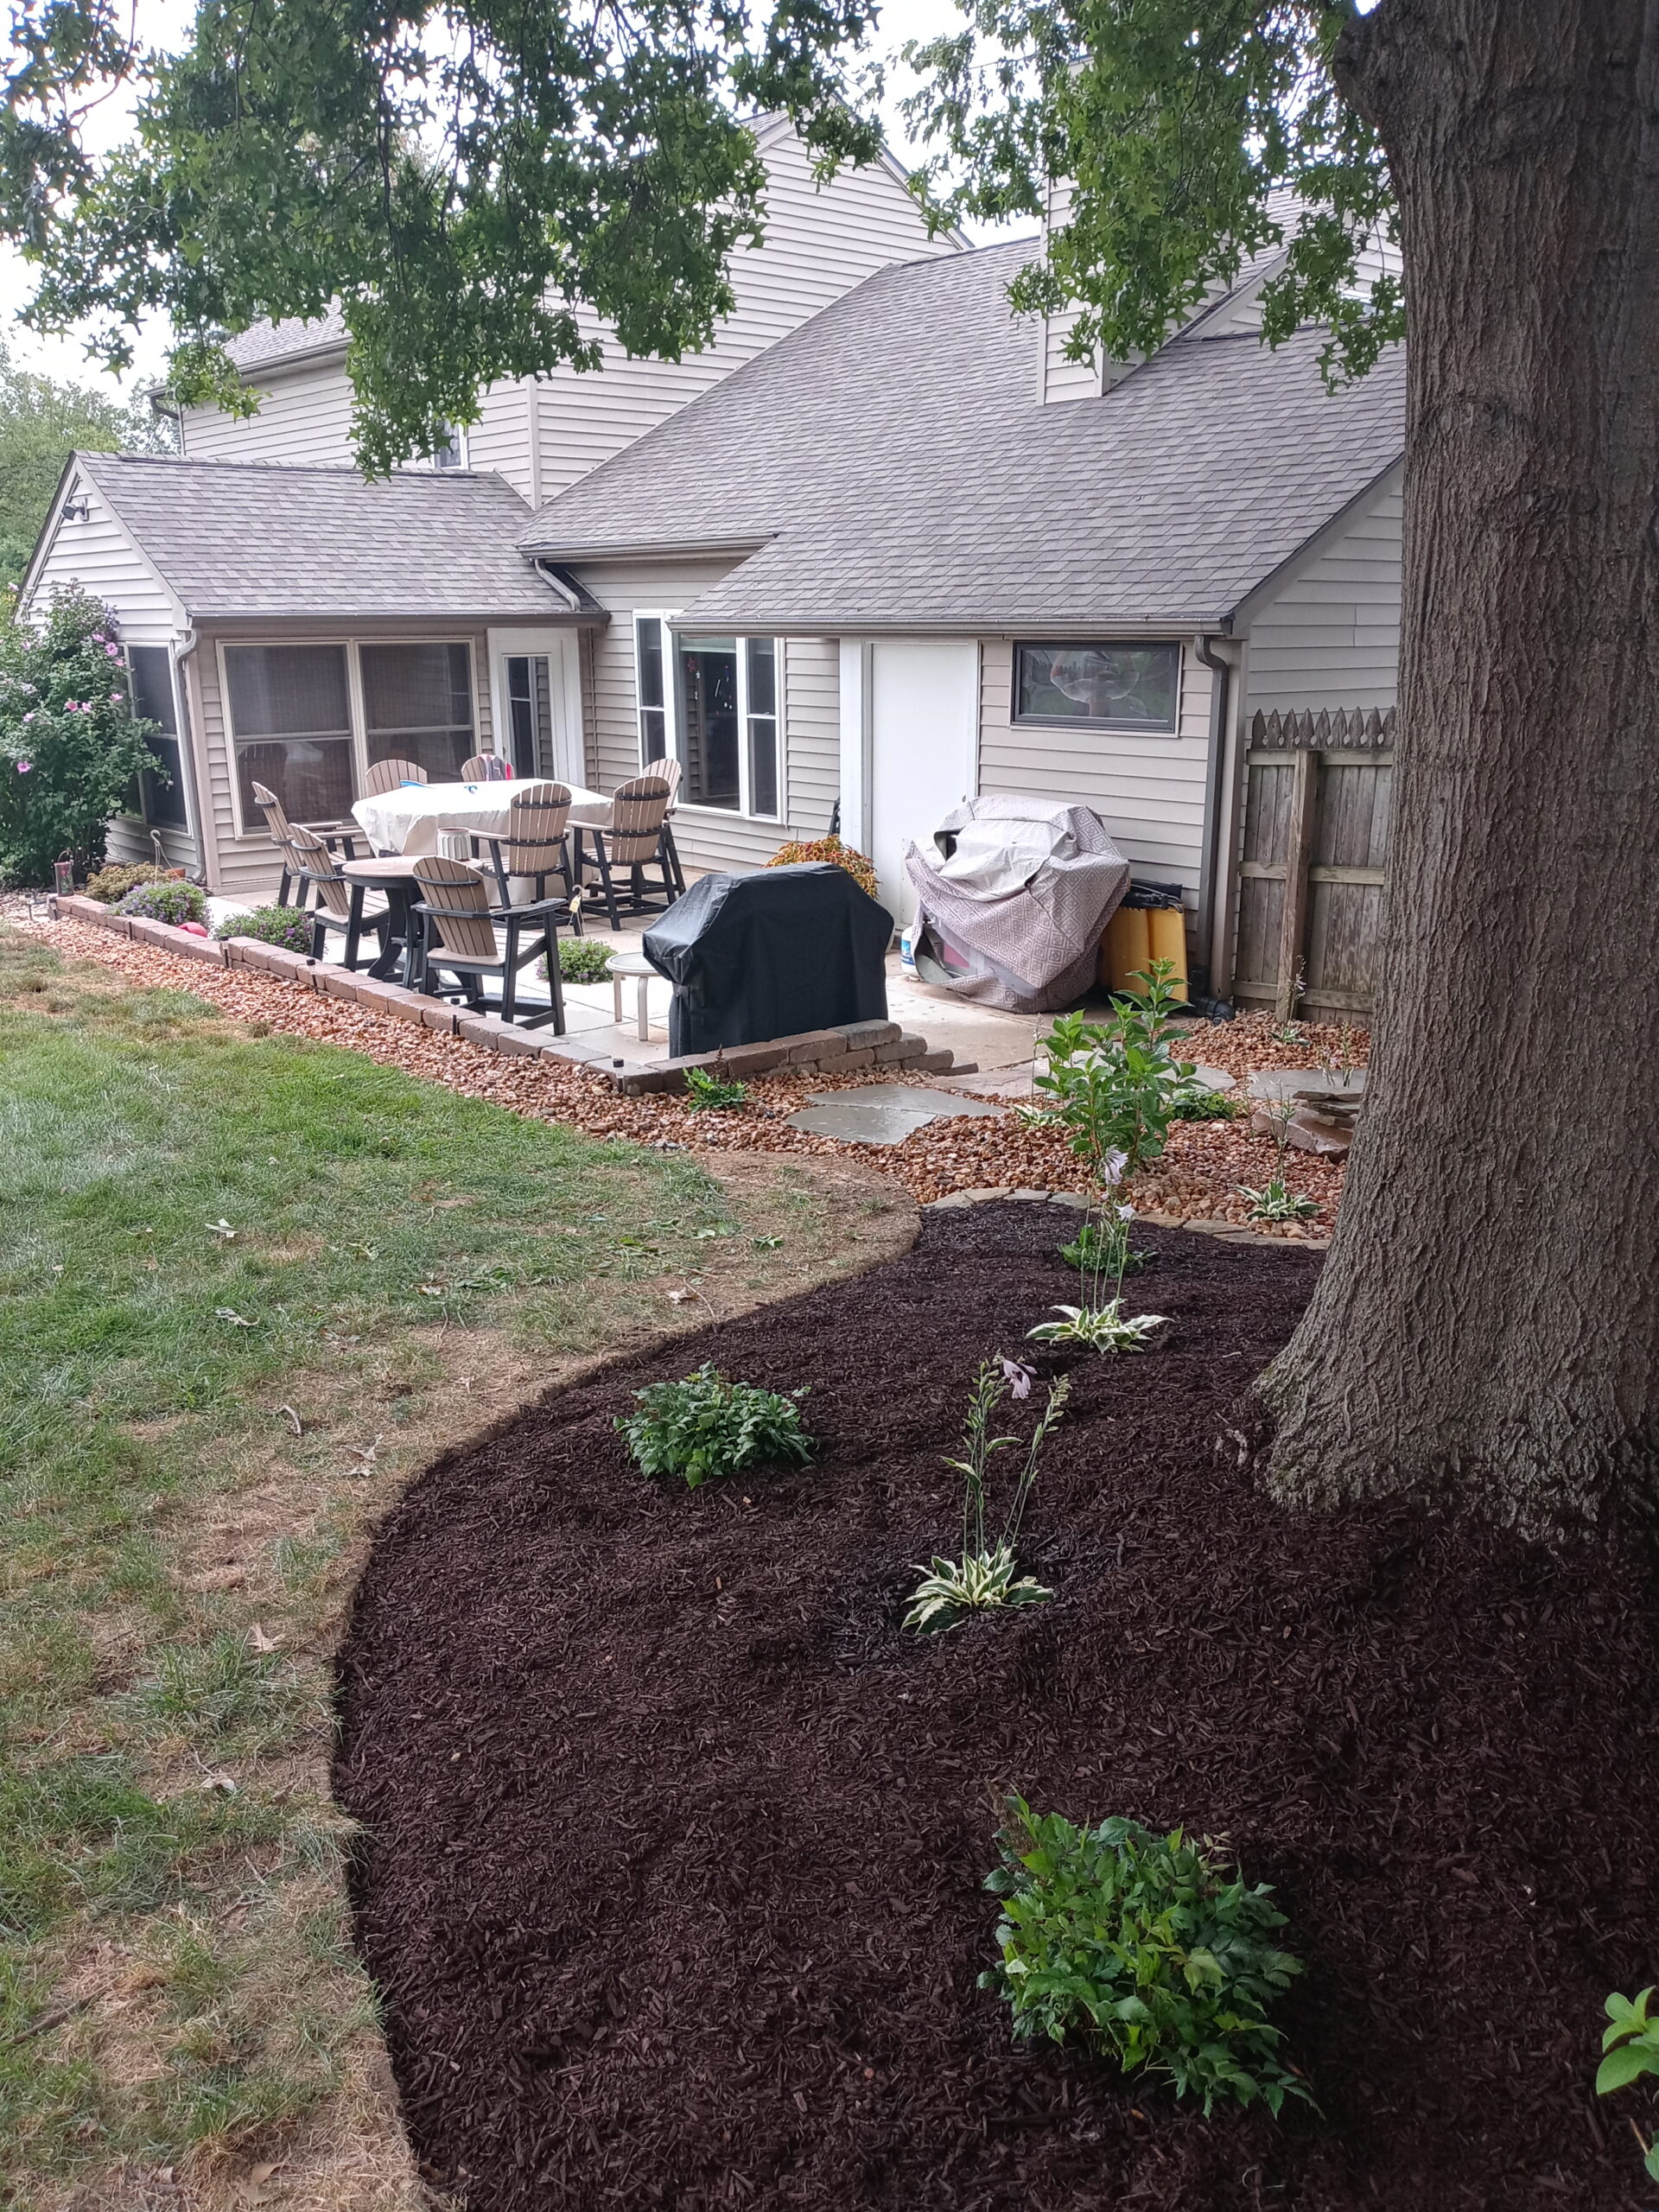 Landscaping and Hardscaping Services, Greater Fort Wayne Area